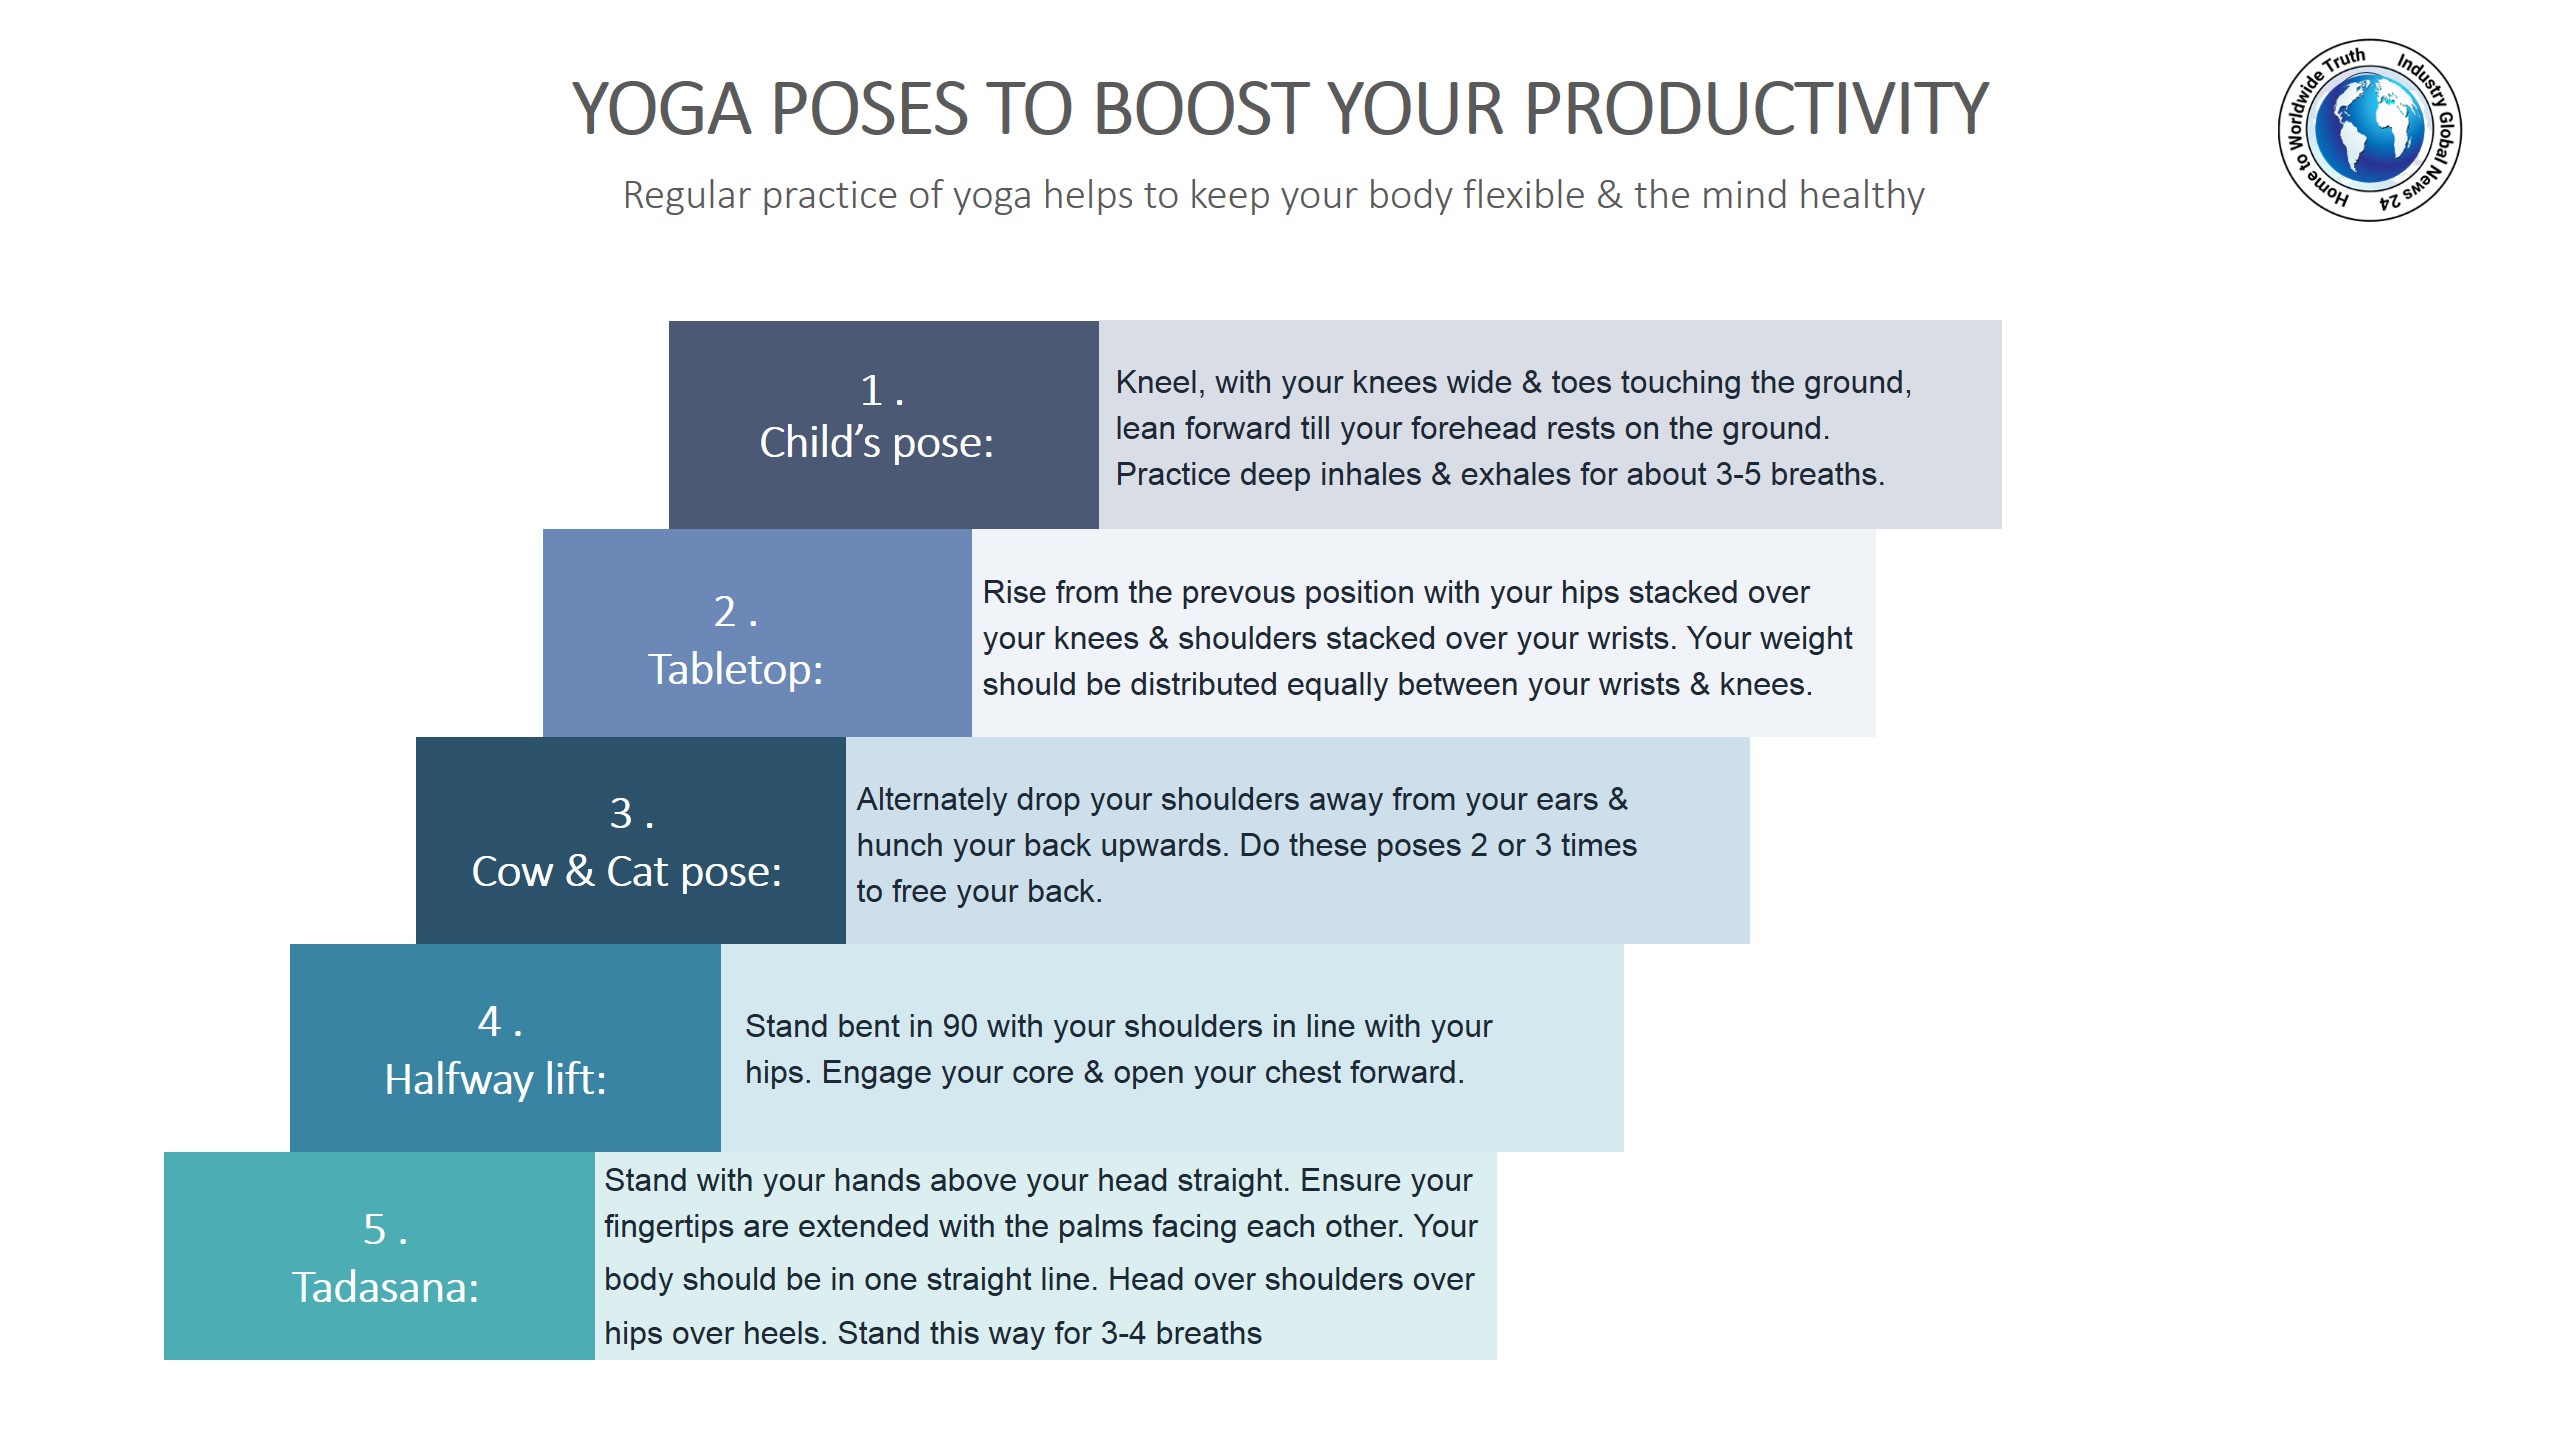 Yoga poses to boost your productivity